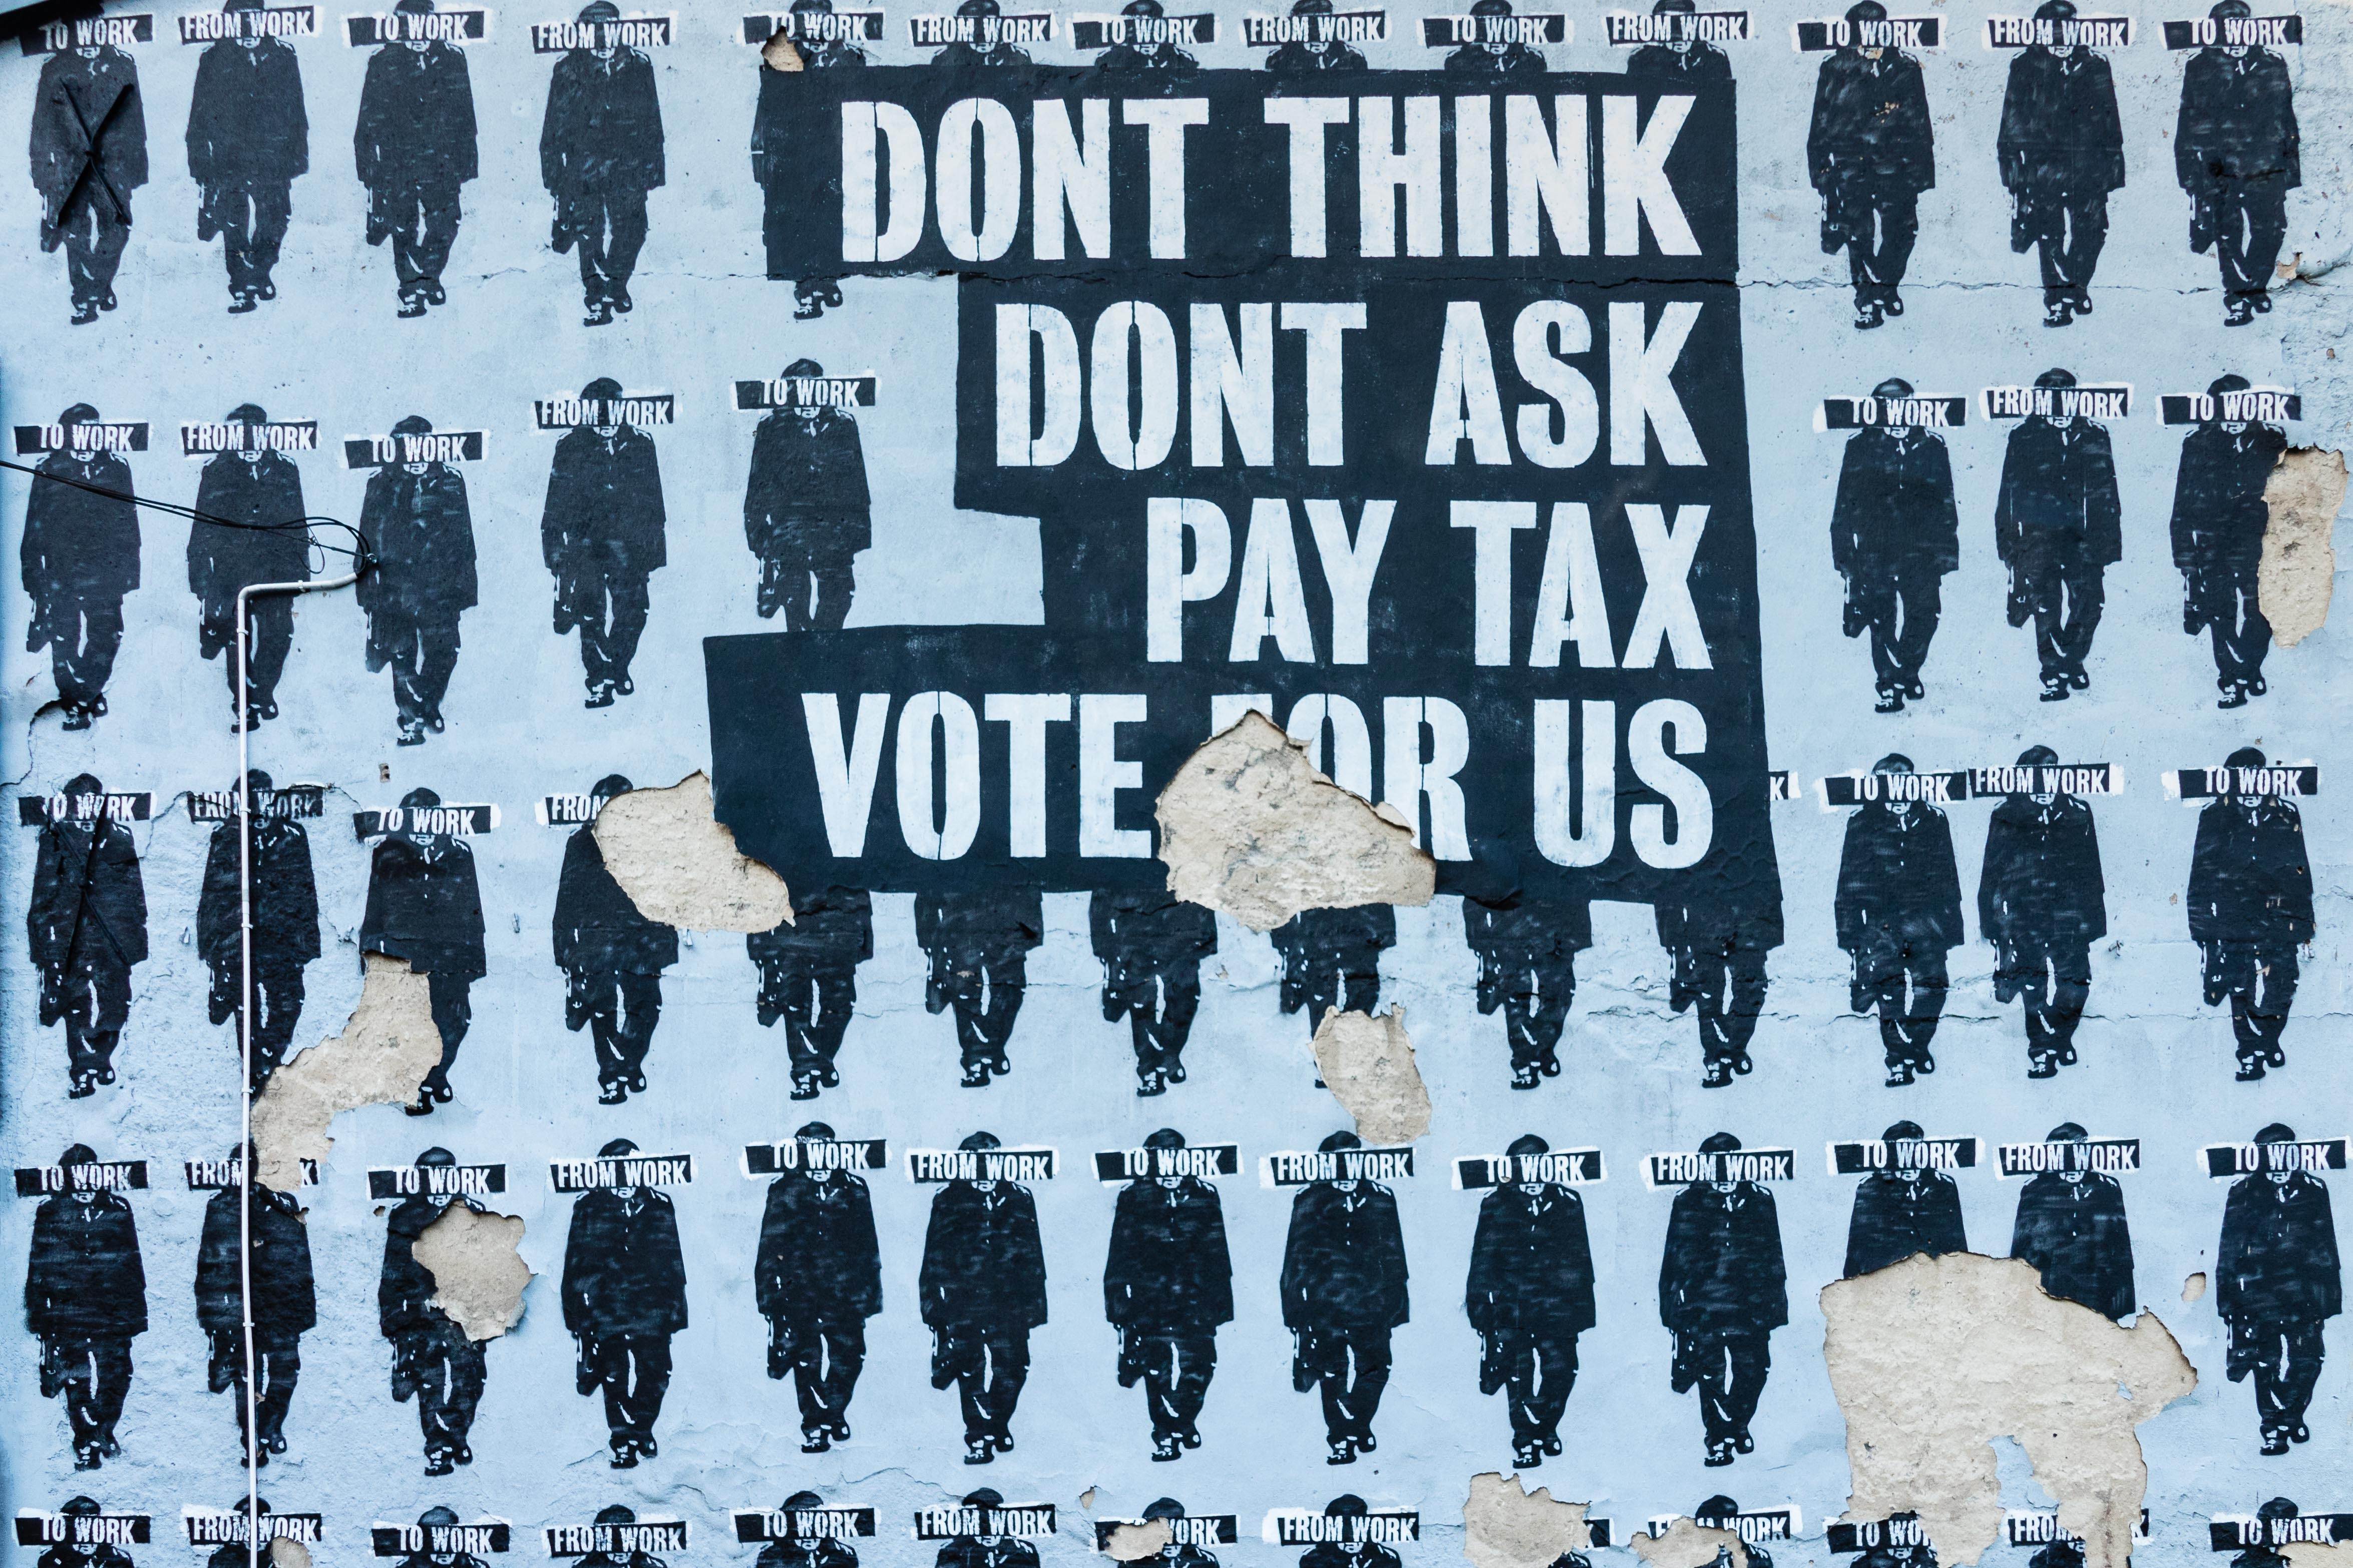 Photo d'une affiche "Dont think, Dont ask, Pay tax, vote for us"